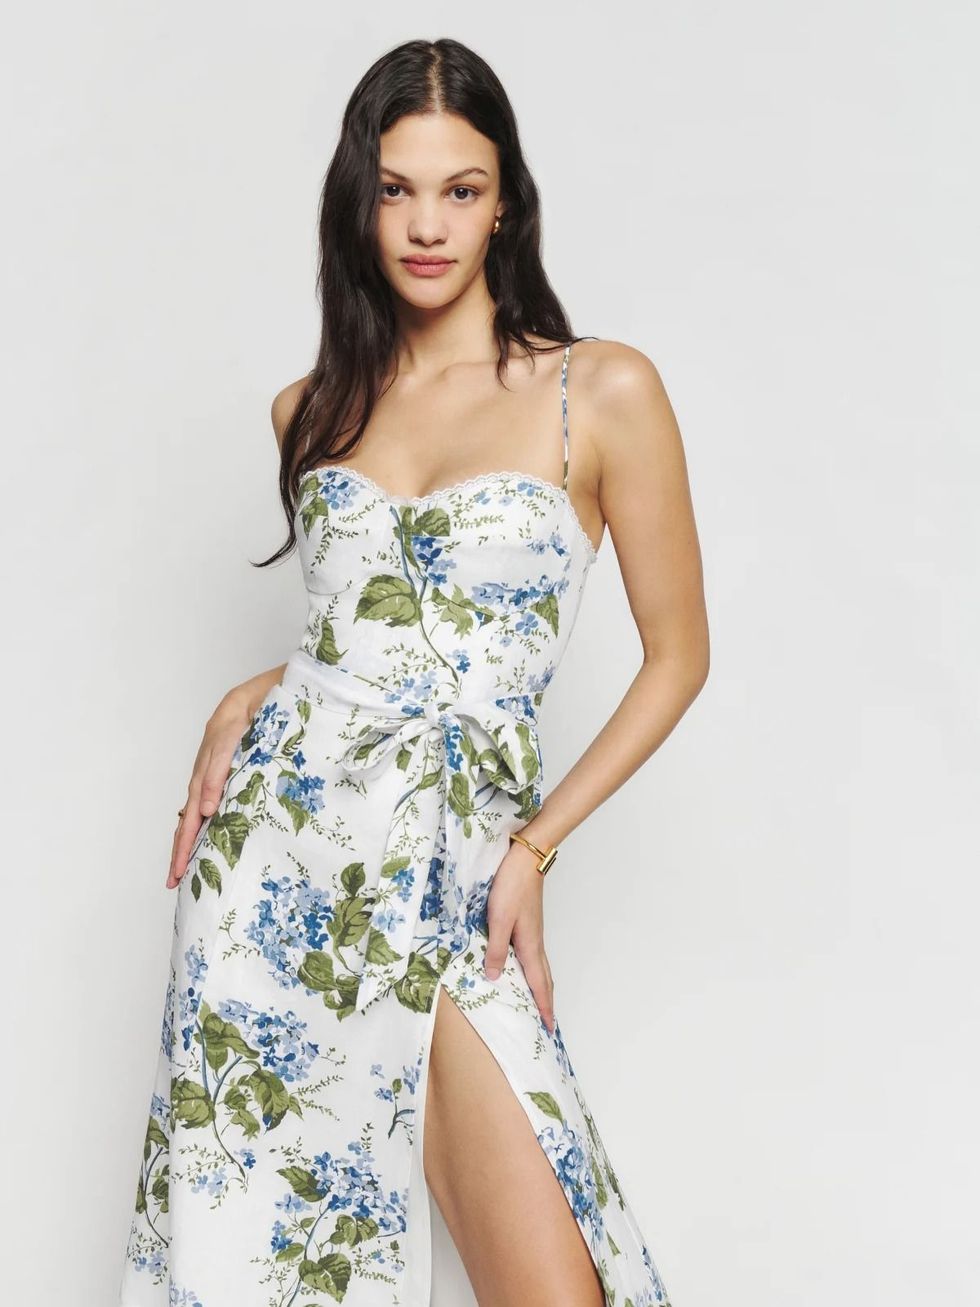 Reformation Sale UK: 15 Discounted Reformation Dresses And More